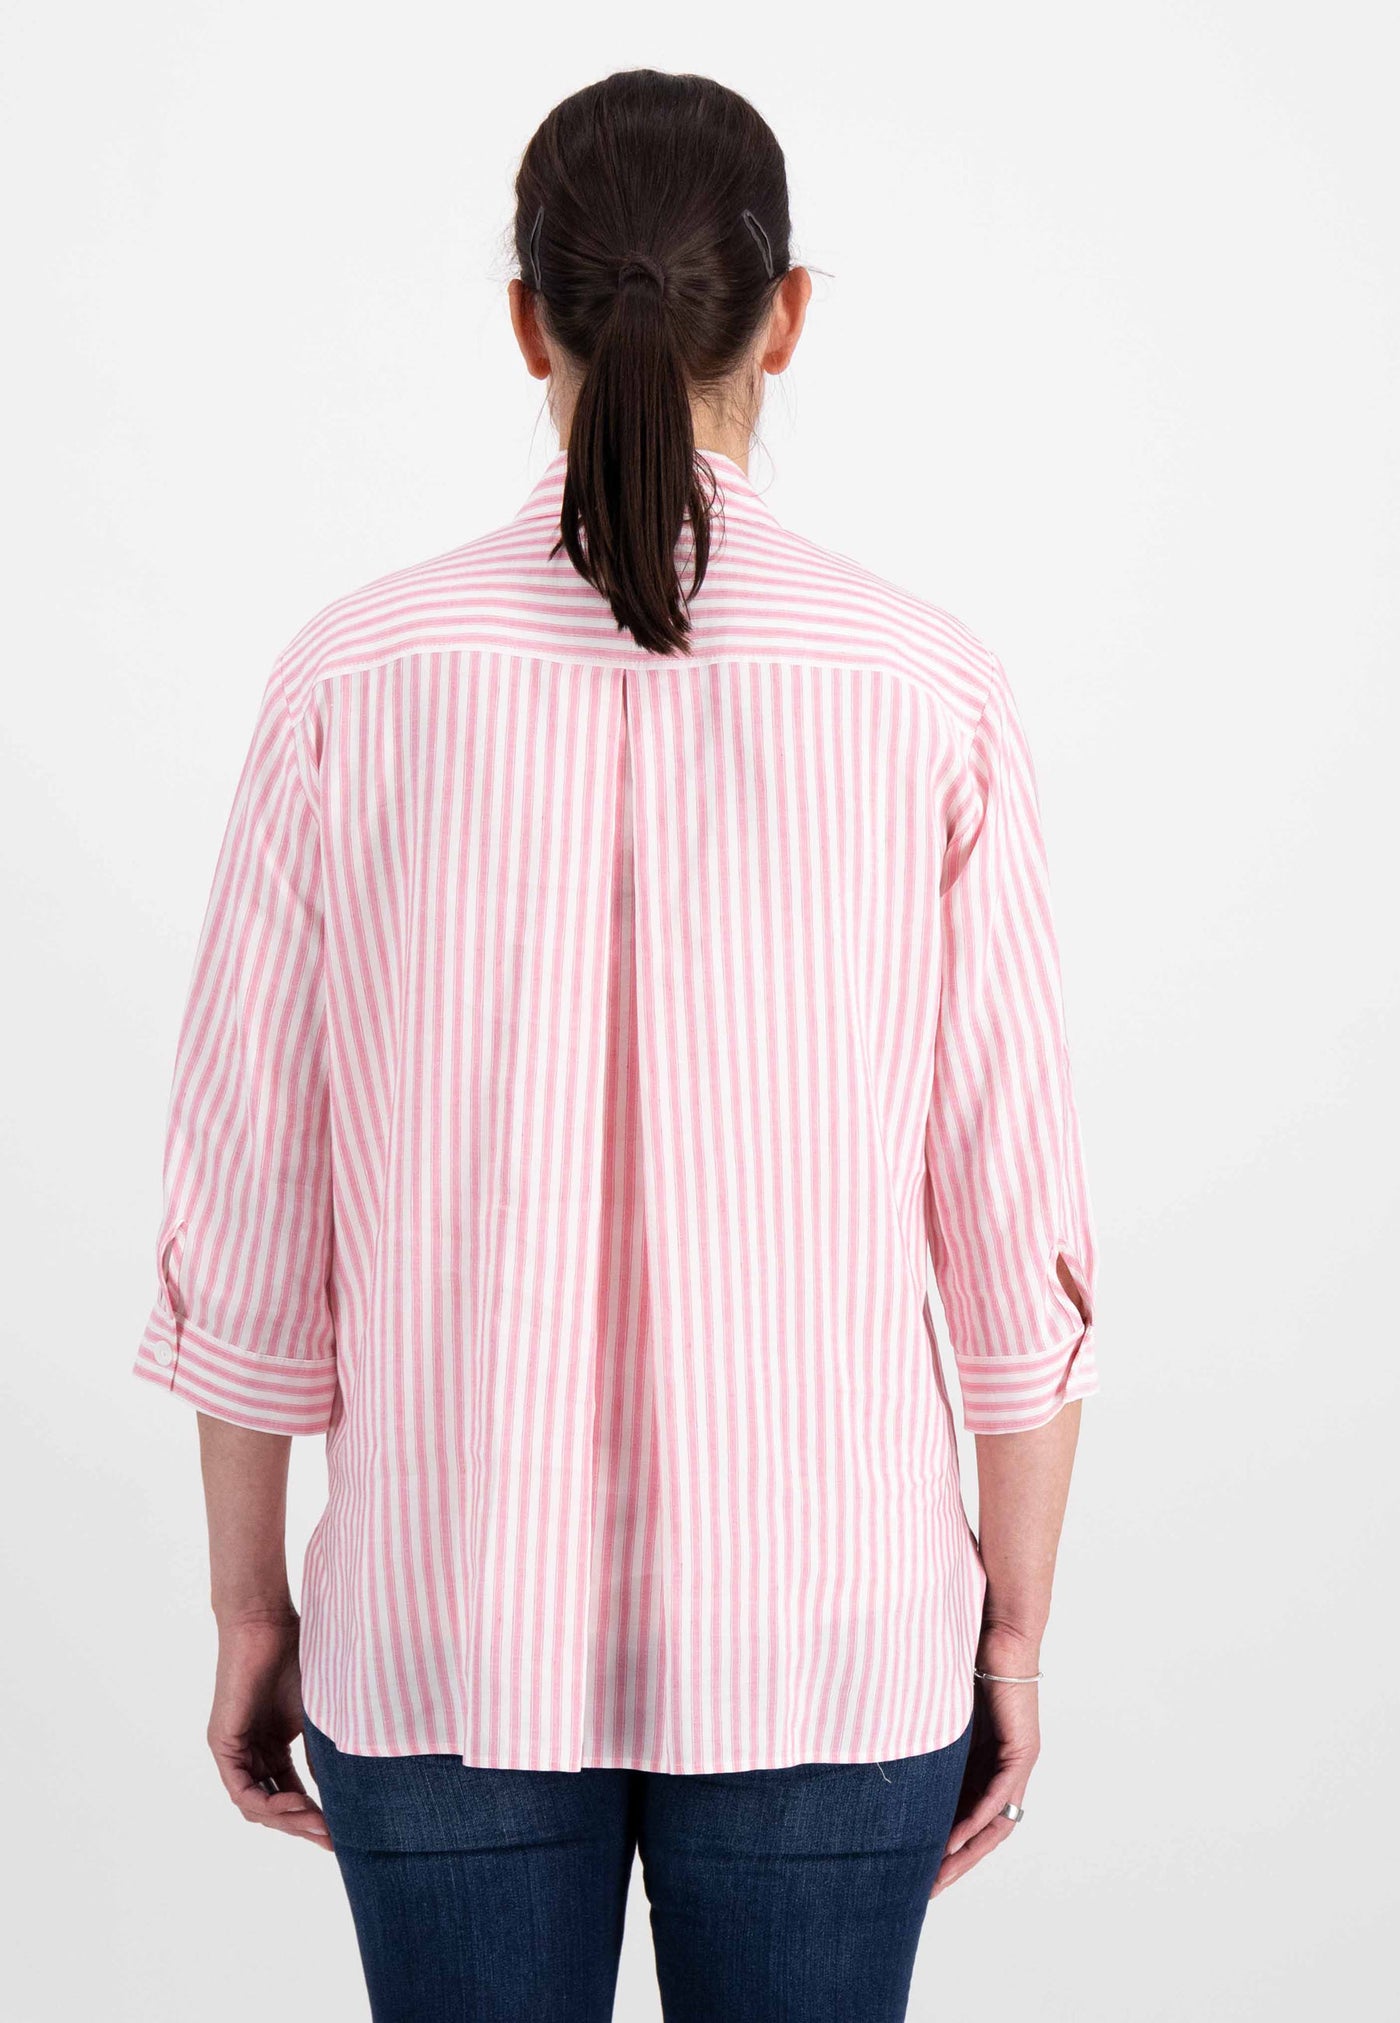 Light Pink & White Striped Shirt with Front Pockets